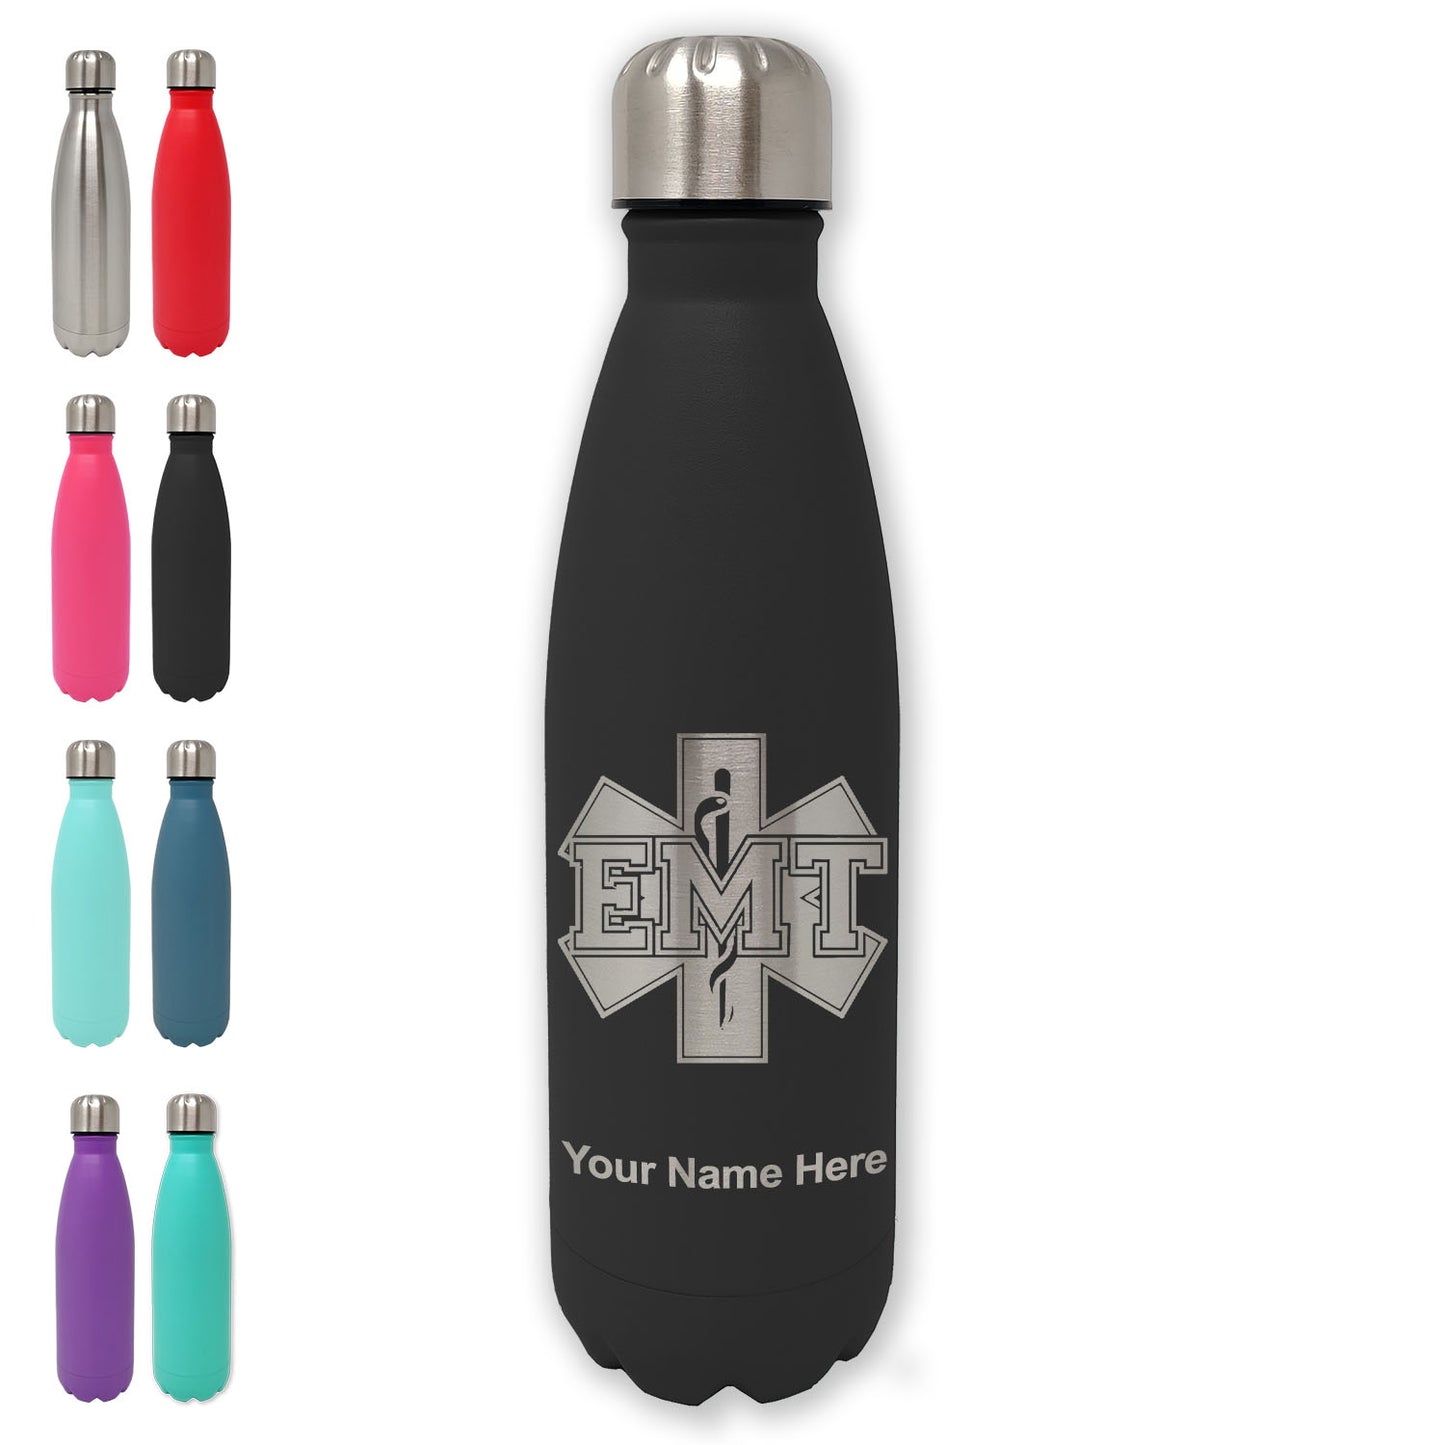 LaserGram Double Wall Water Bottle, EMT Emergency Medical Technician, Personalized Engraving Included